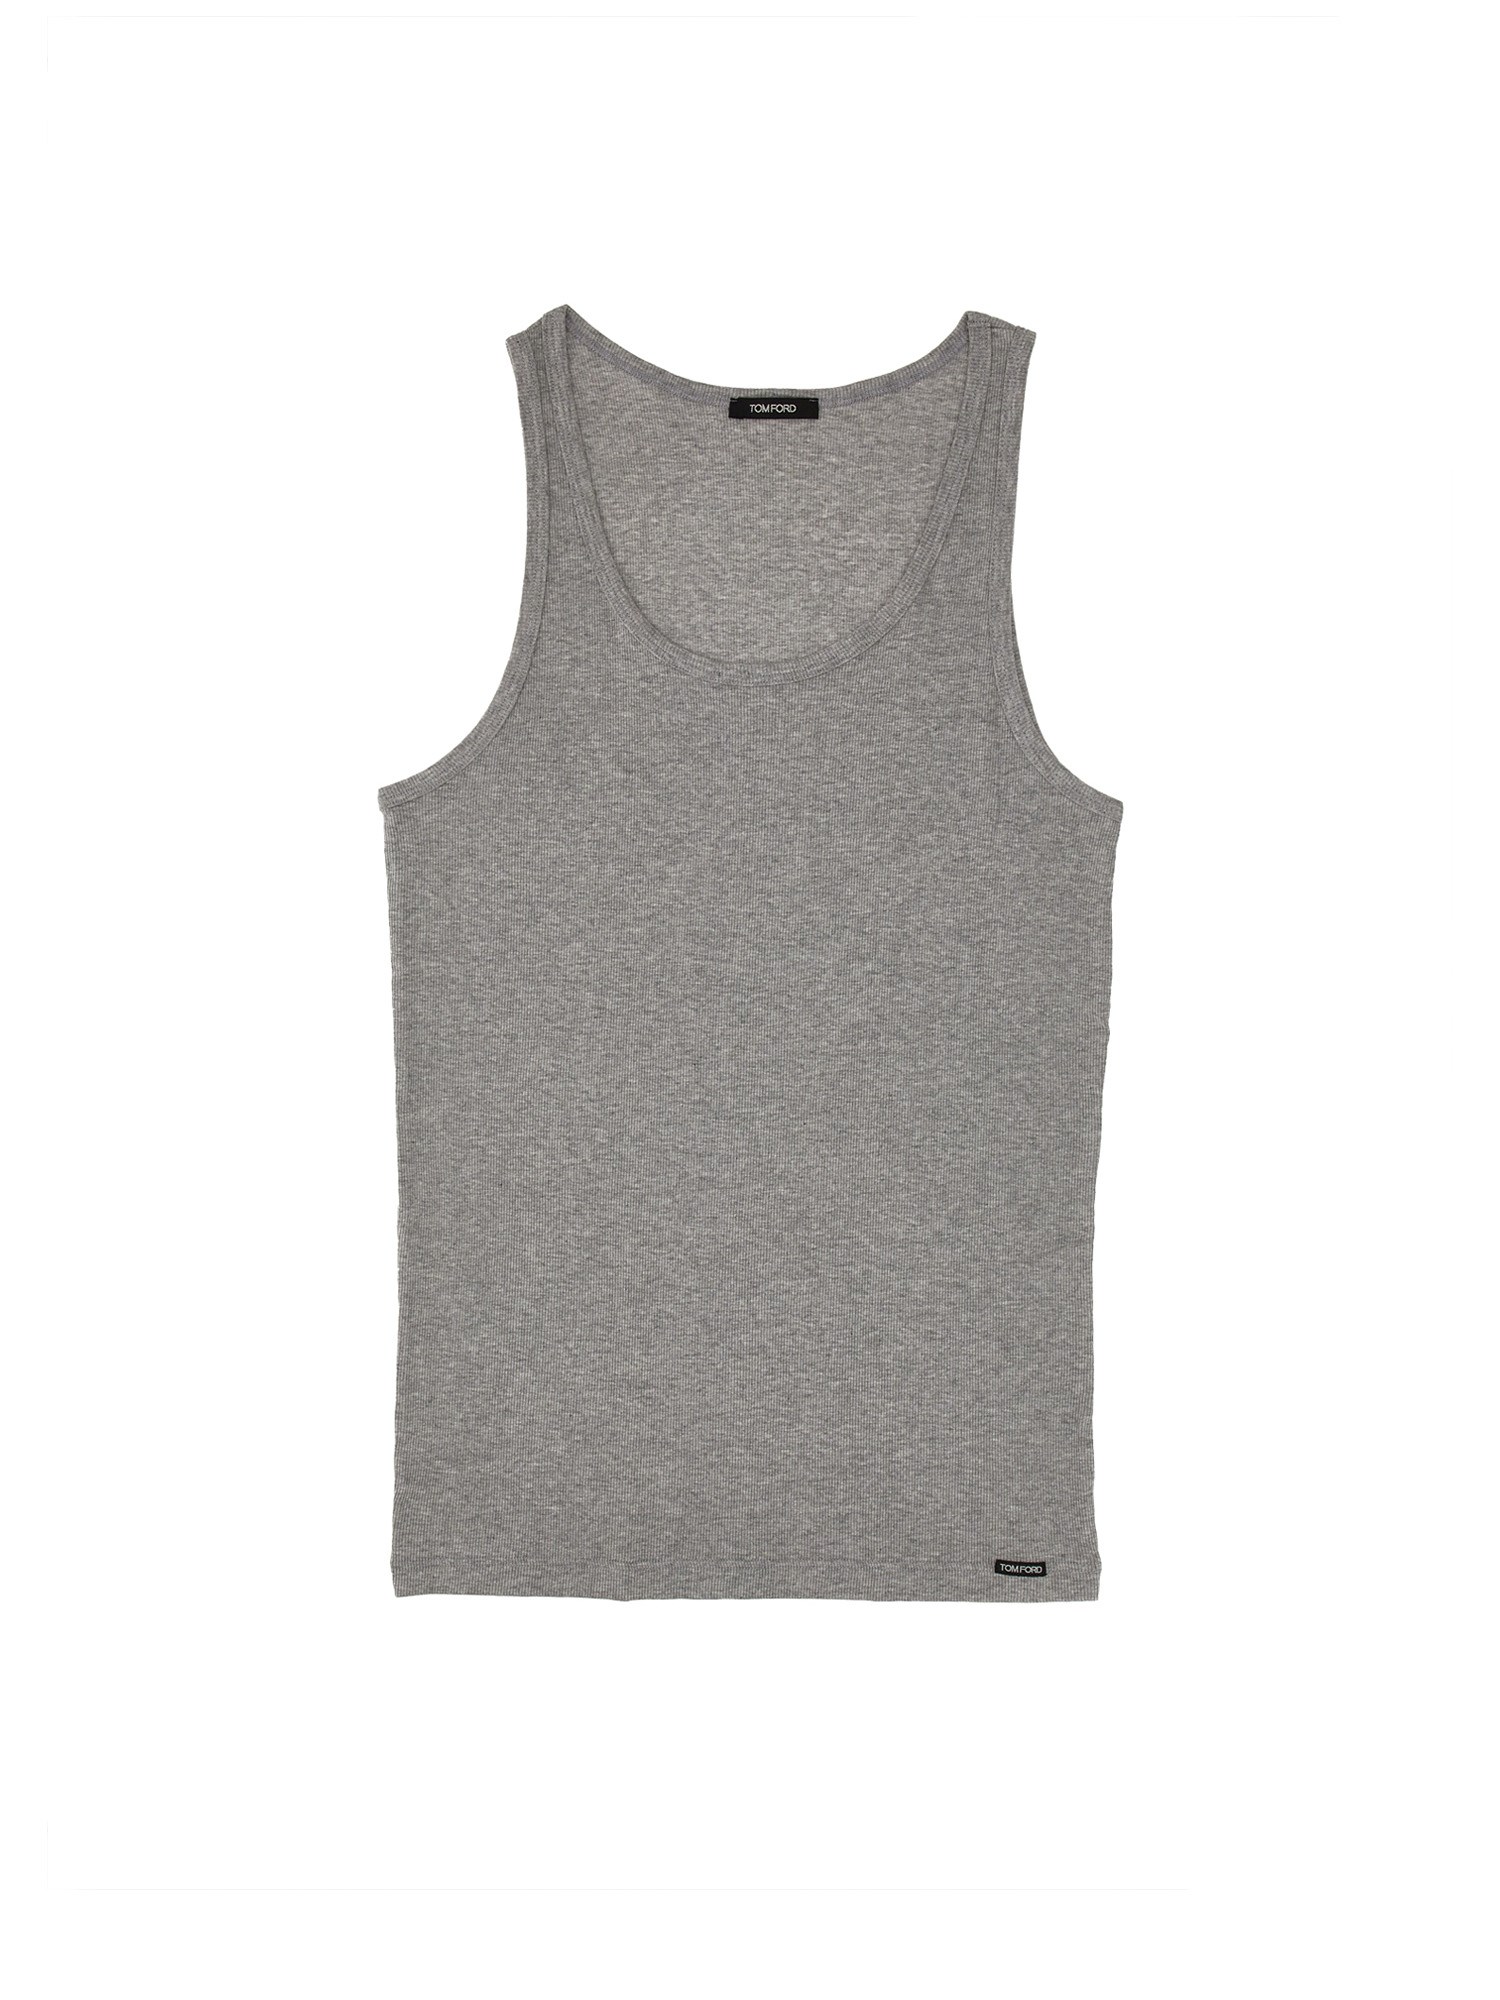 tom ford tank top with logo